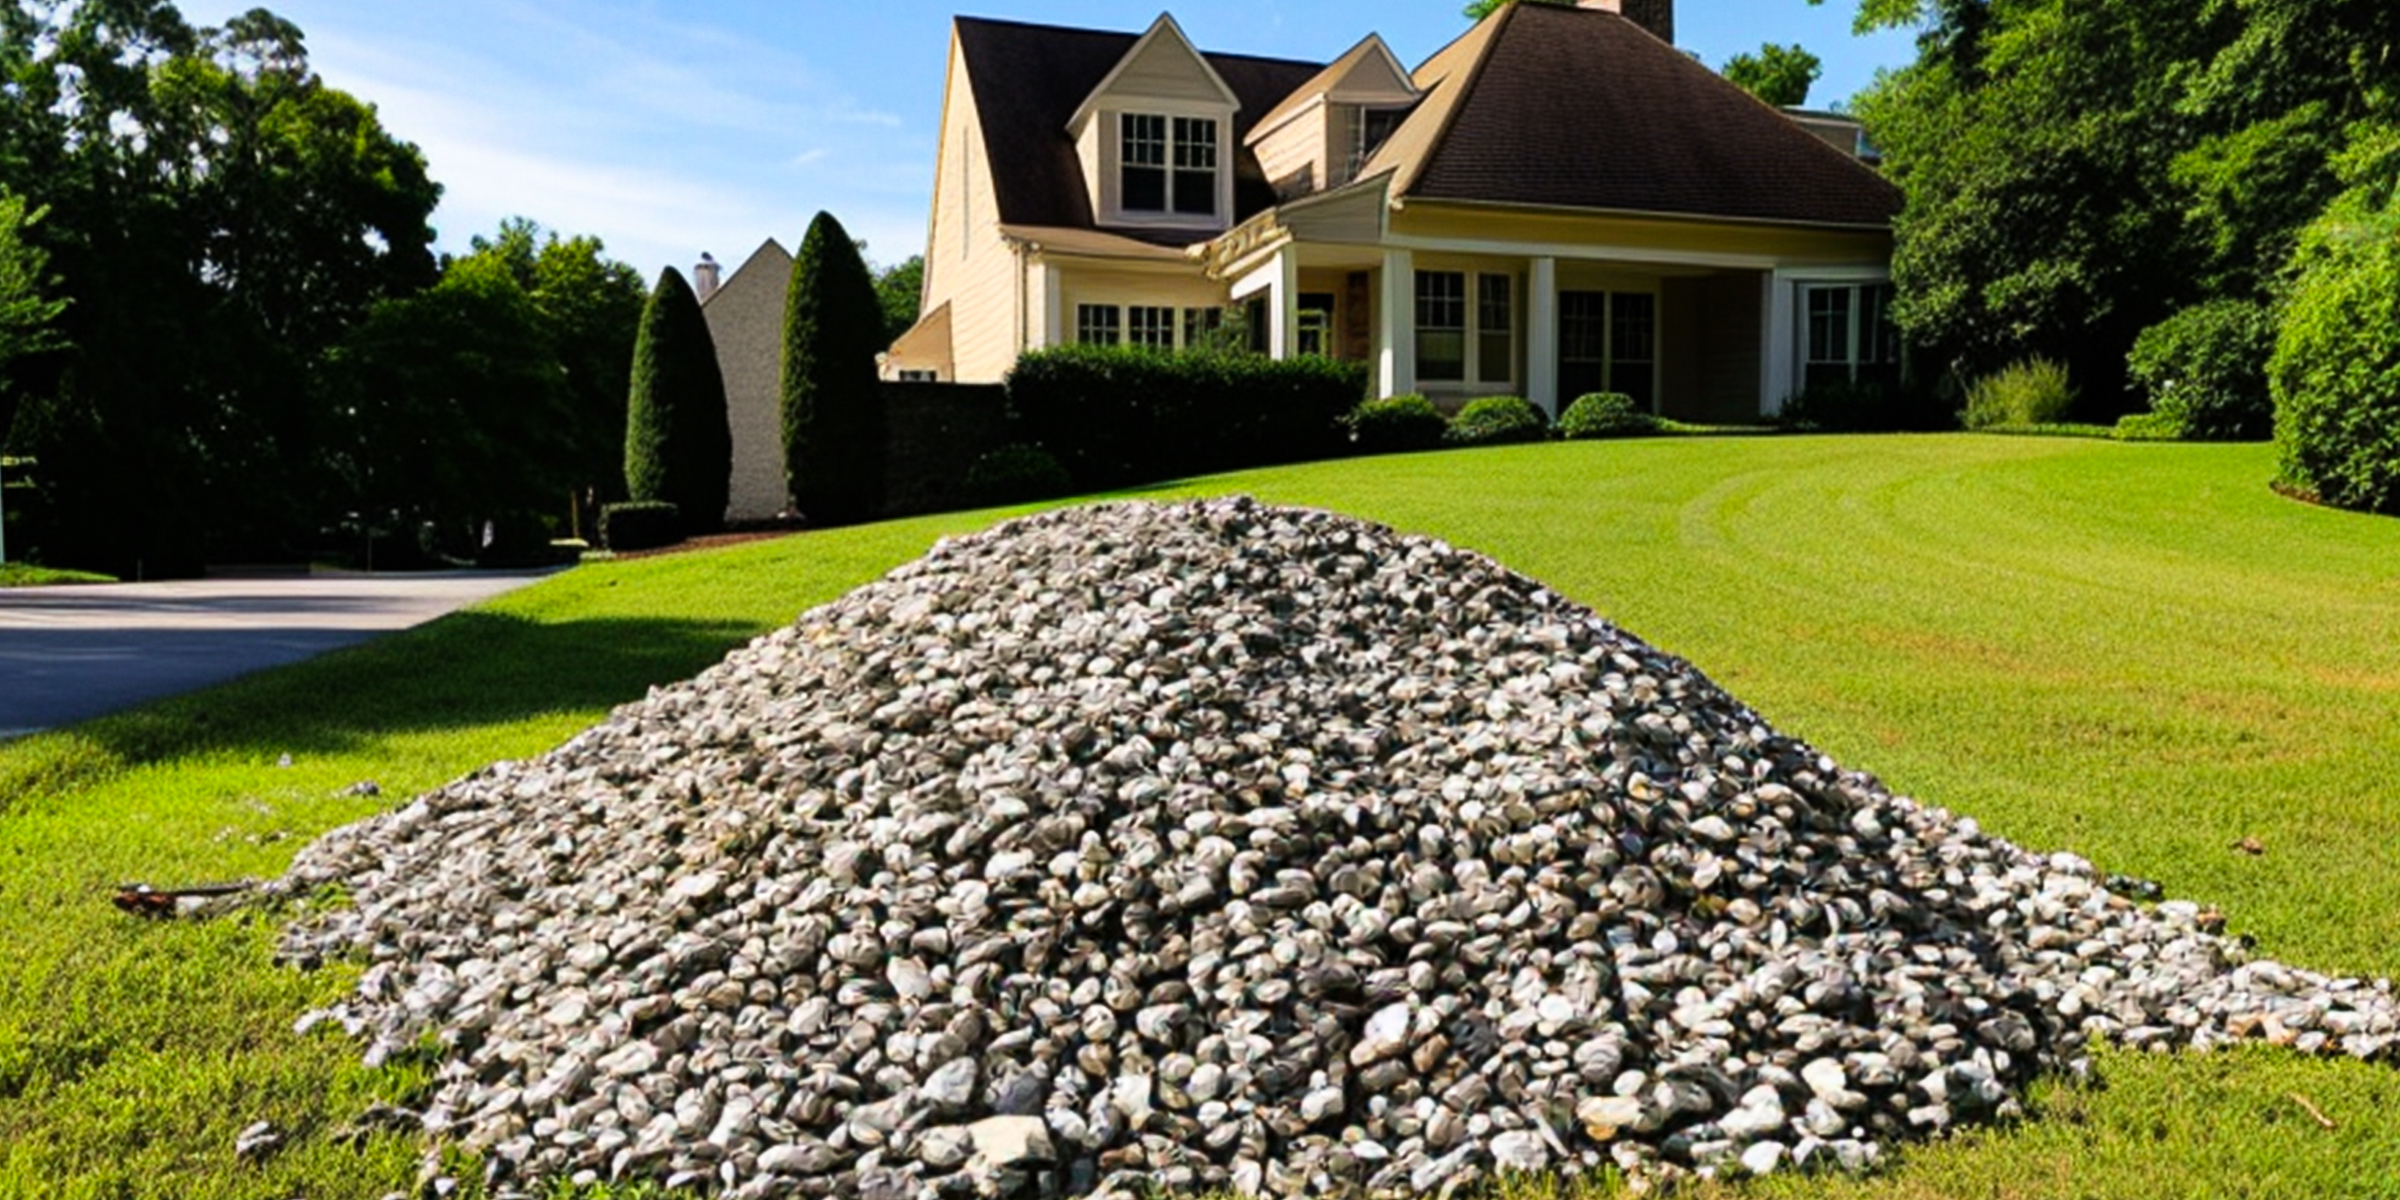 Pile of gravel dumped on lush green lawn | Source: AmoMama